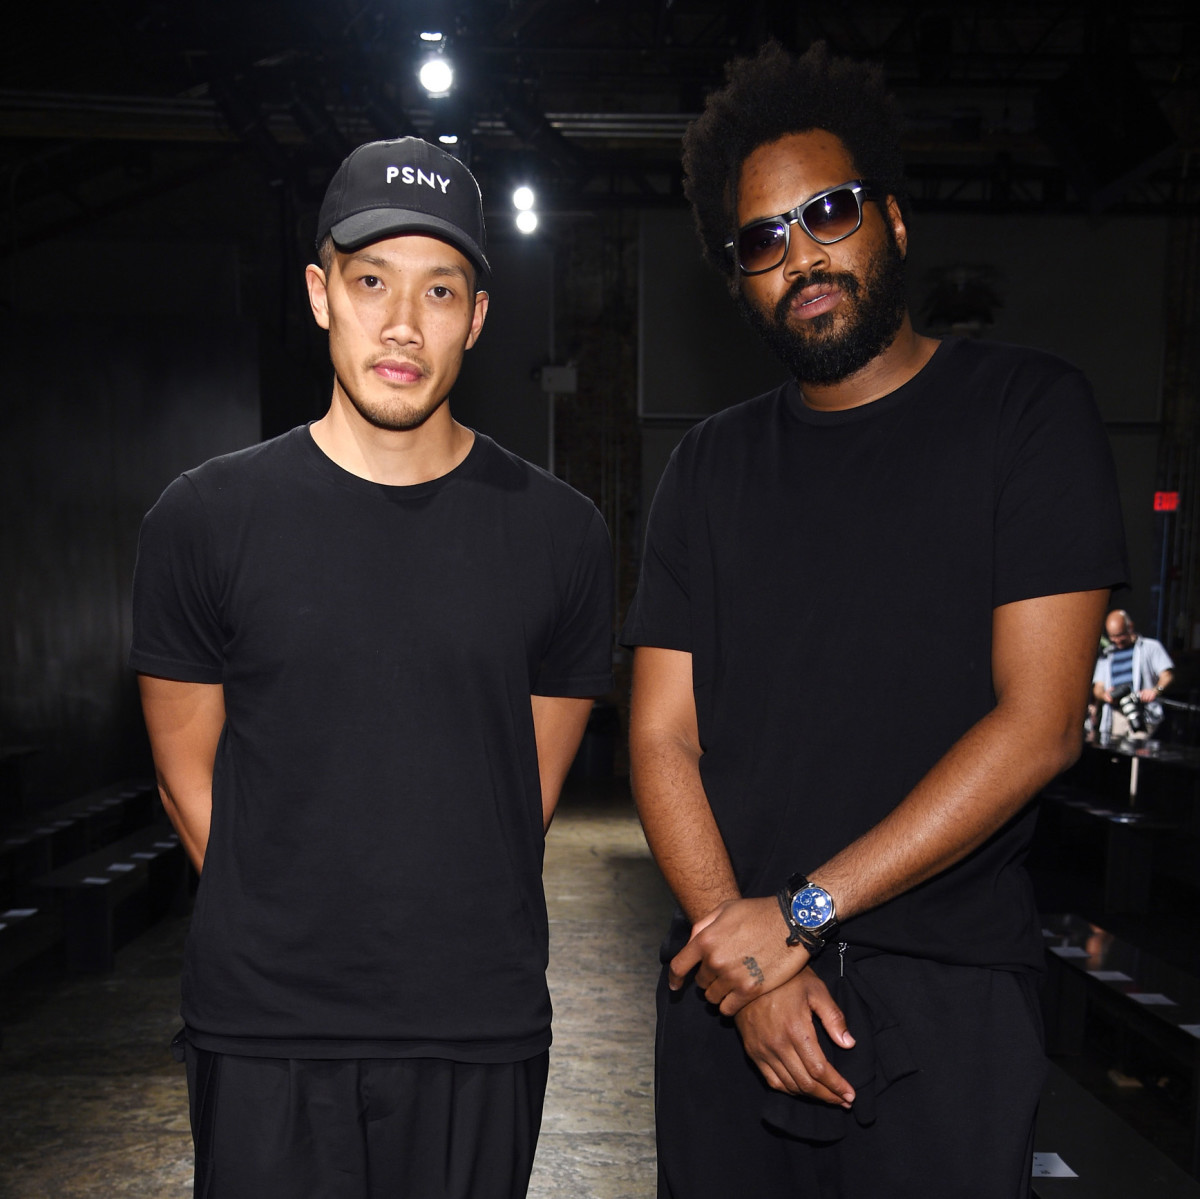 DKNY designers Dao-Yi Chow and Maxwell Osborne. Photo: Dimitrios Kambouris/Getty Images